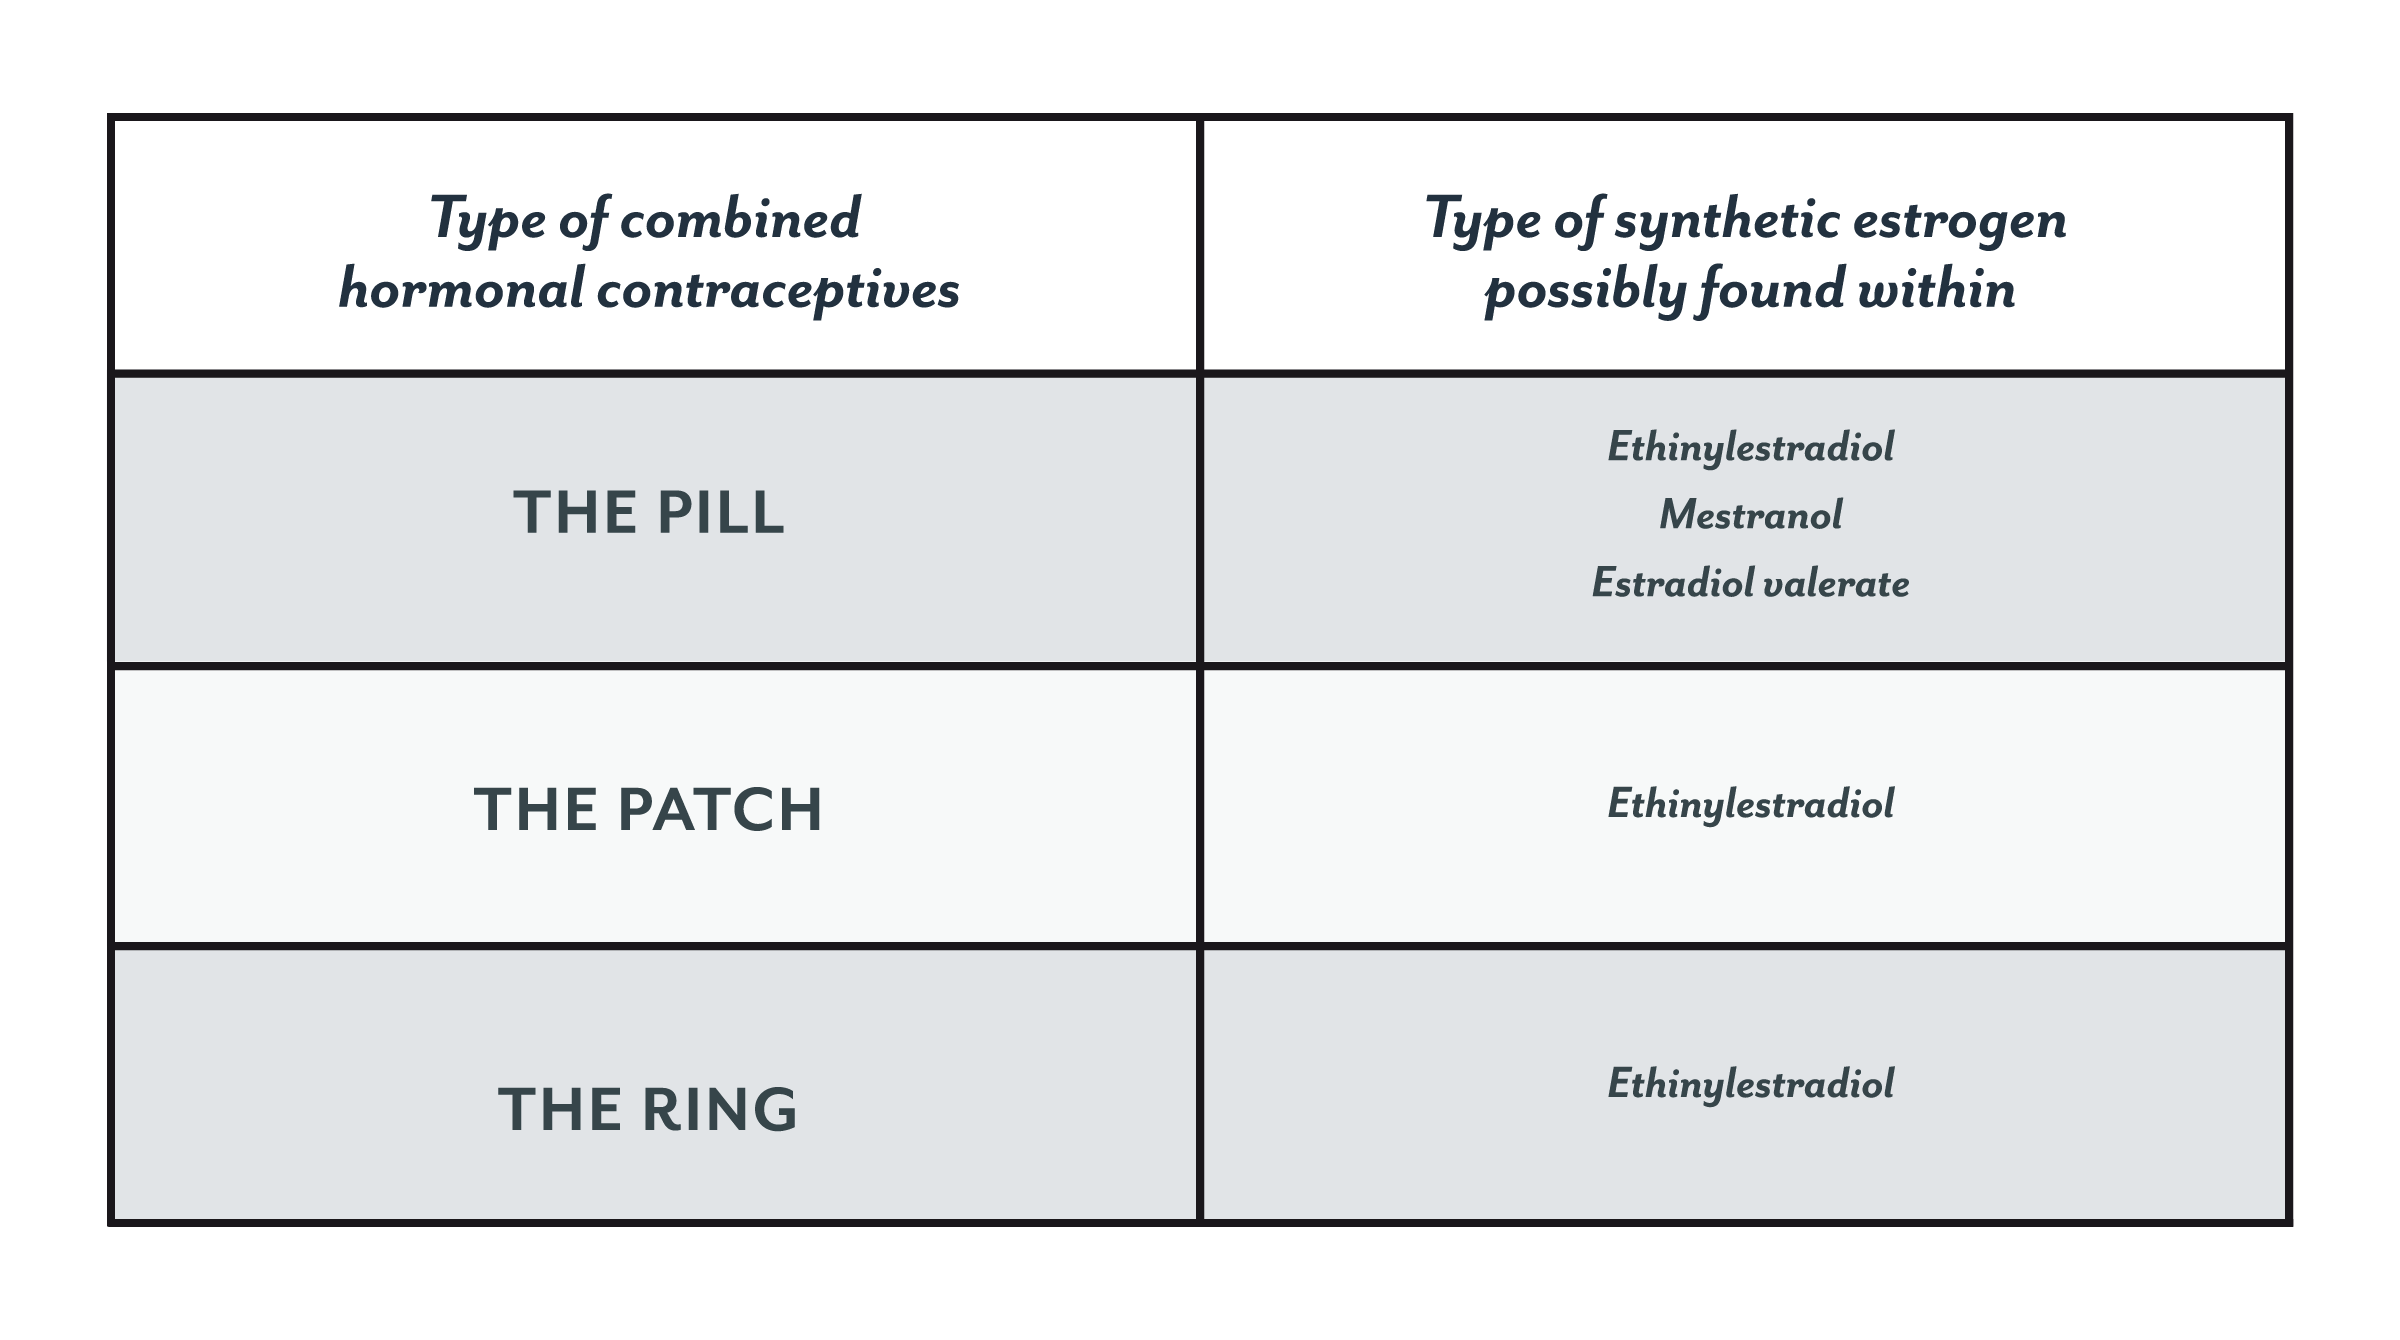 The types of synthetic estrogens possibly found in hormonal contraceptives